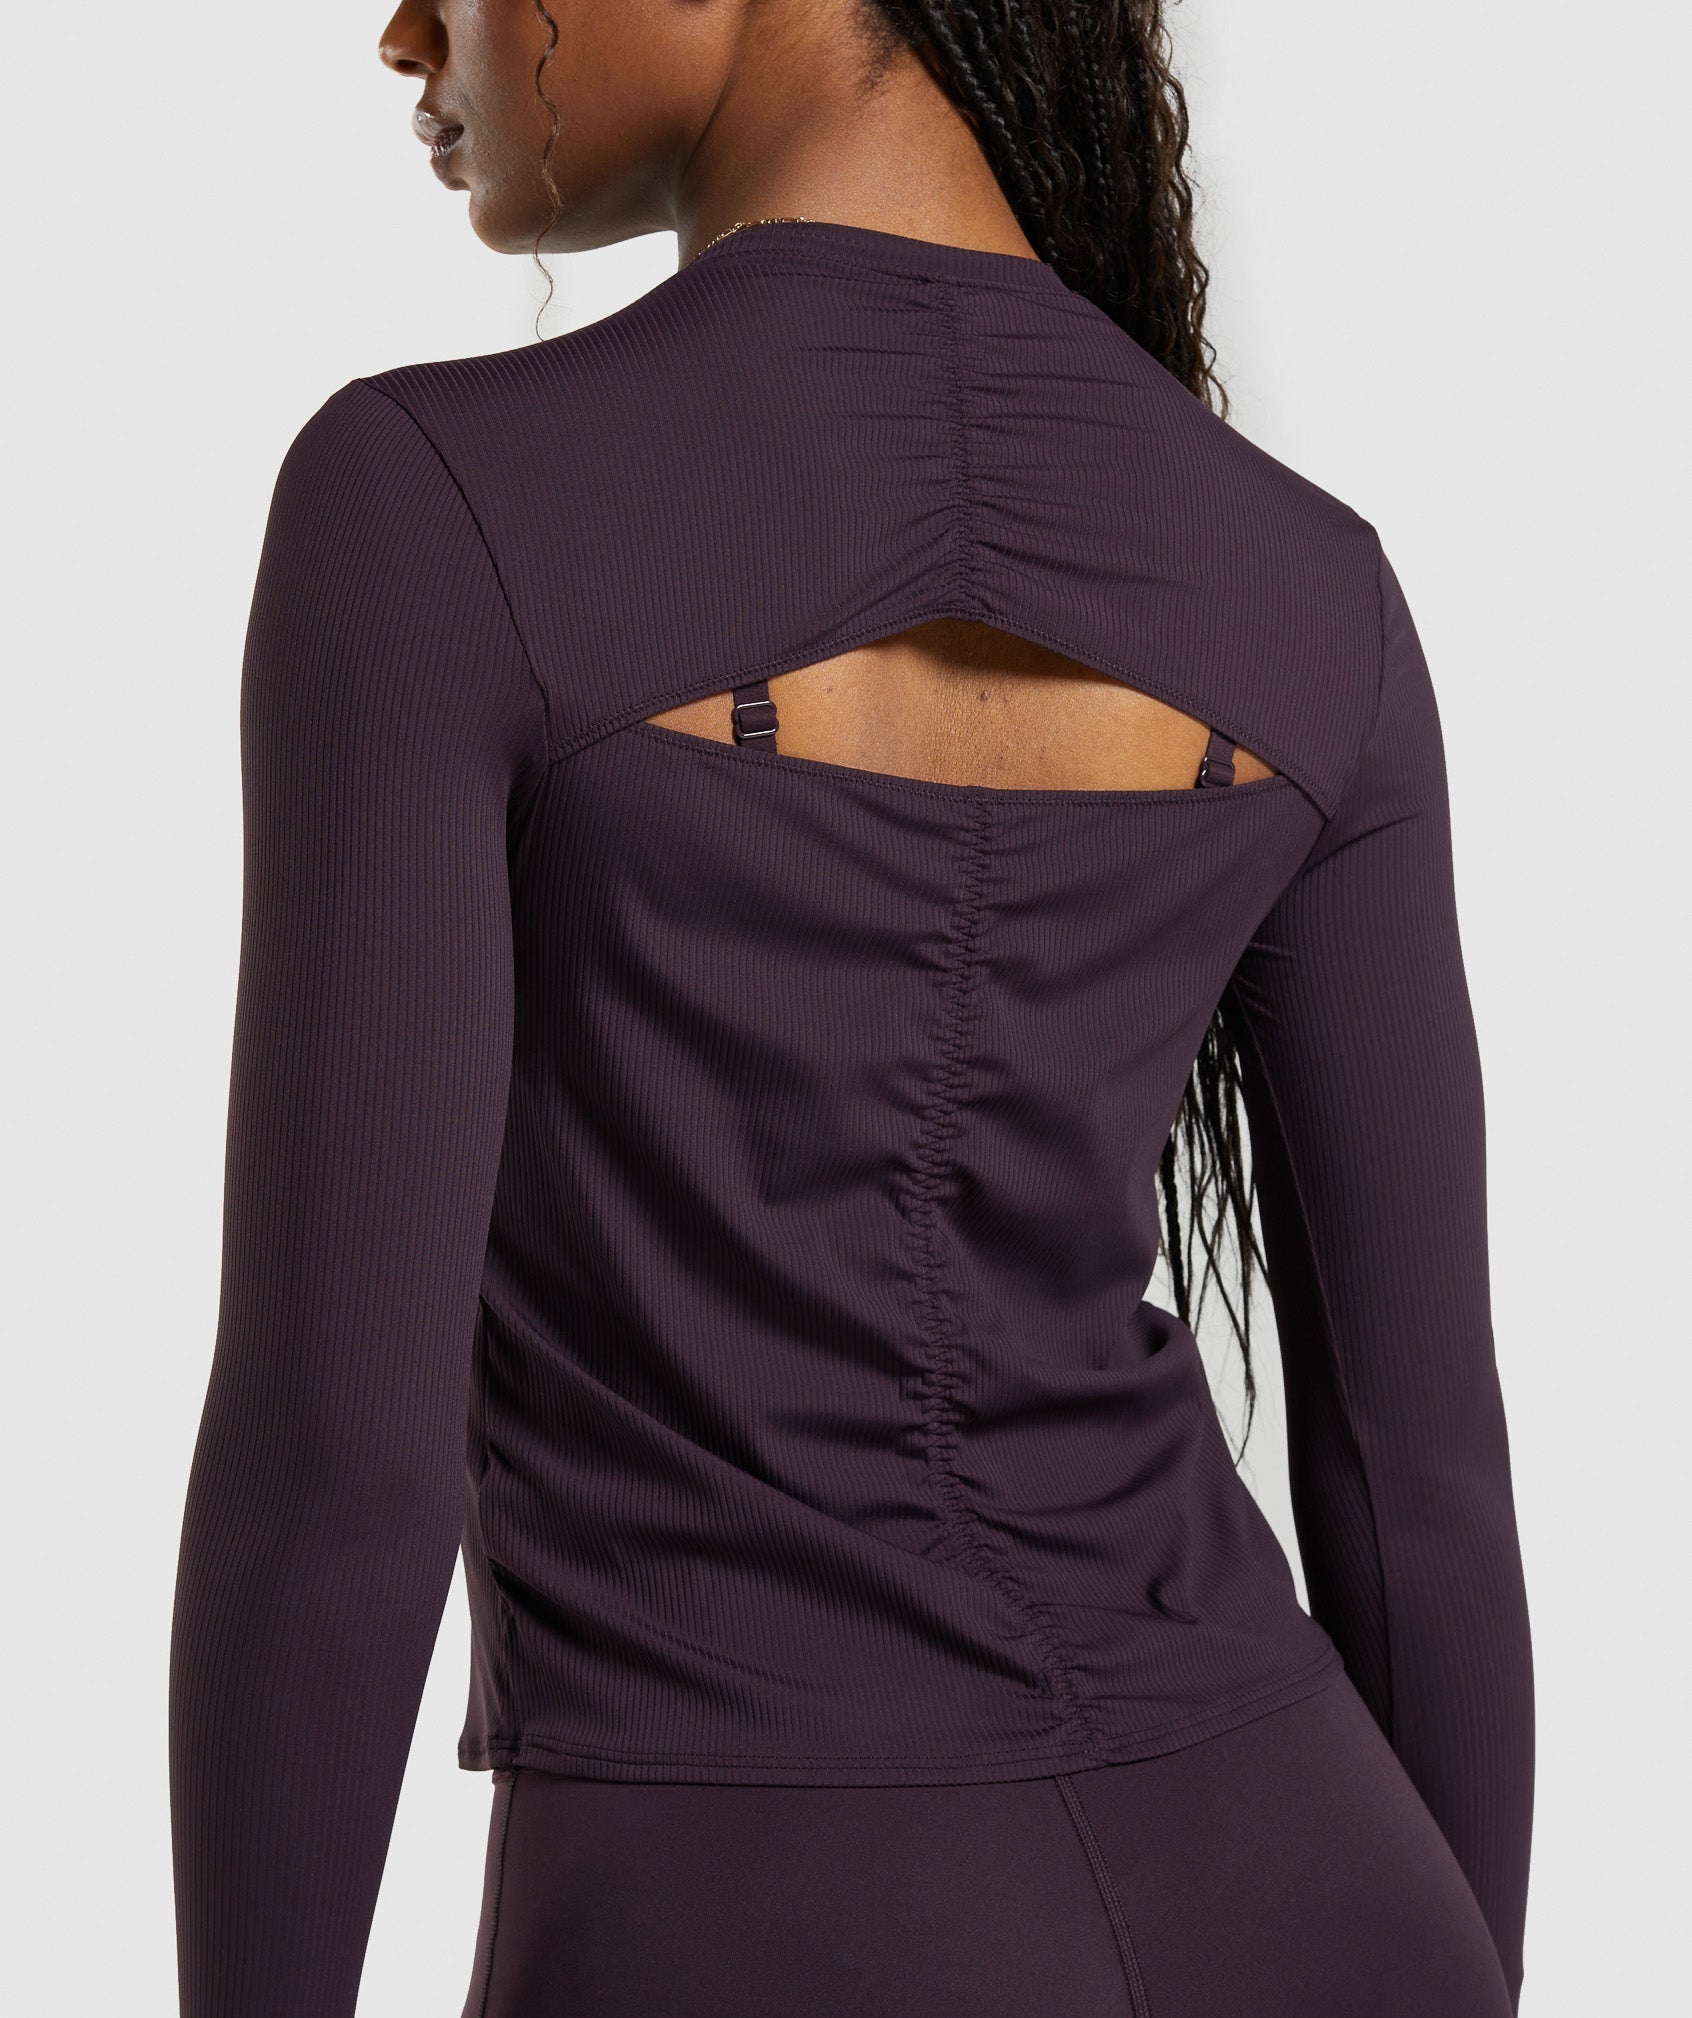 Elevate Long Sleeve Ruched Top in Plum Brown - view 6